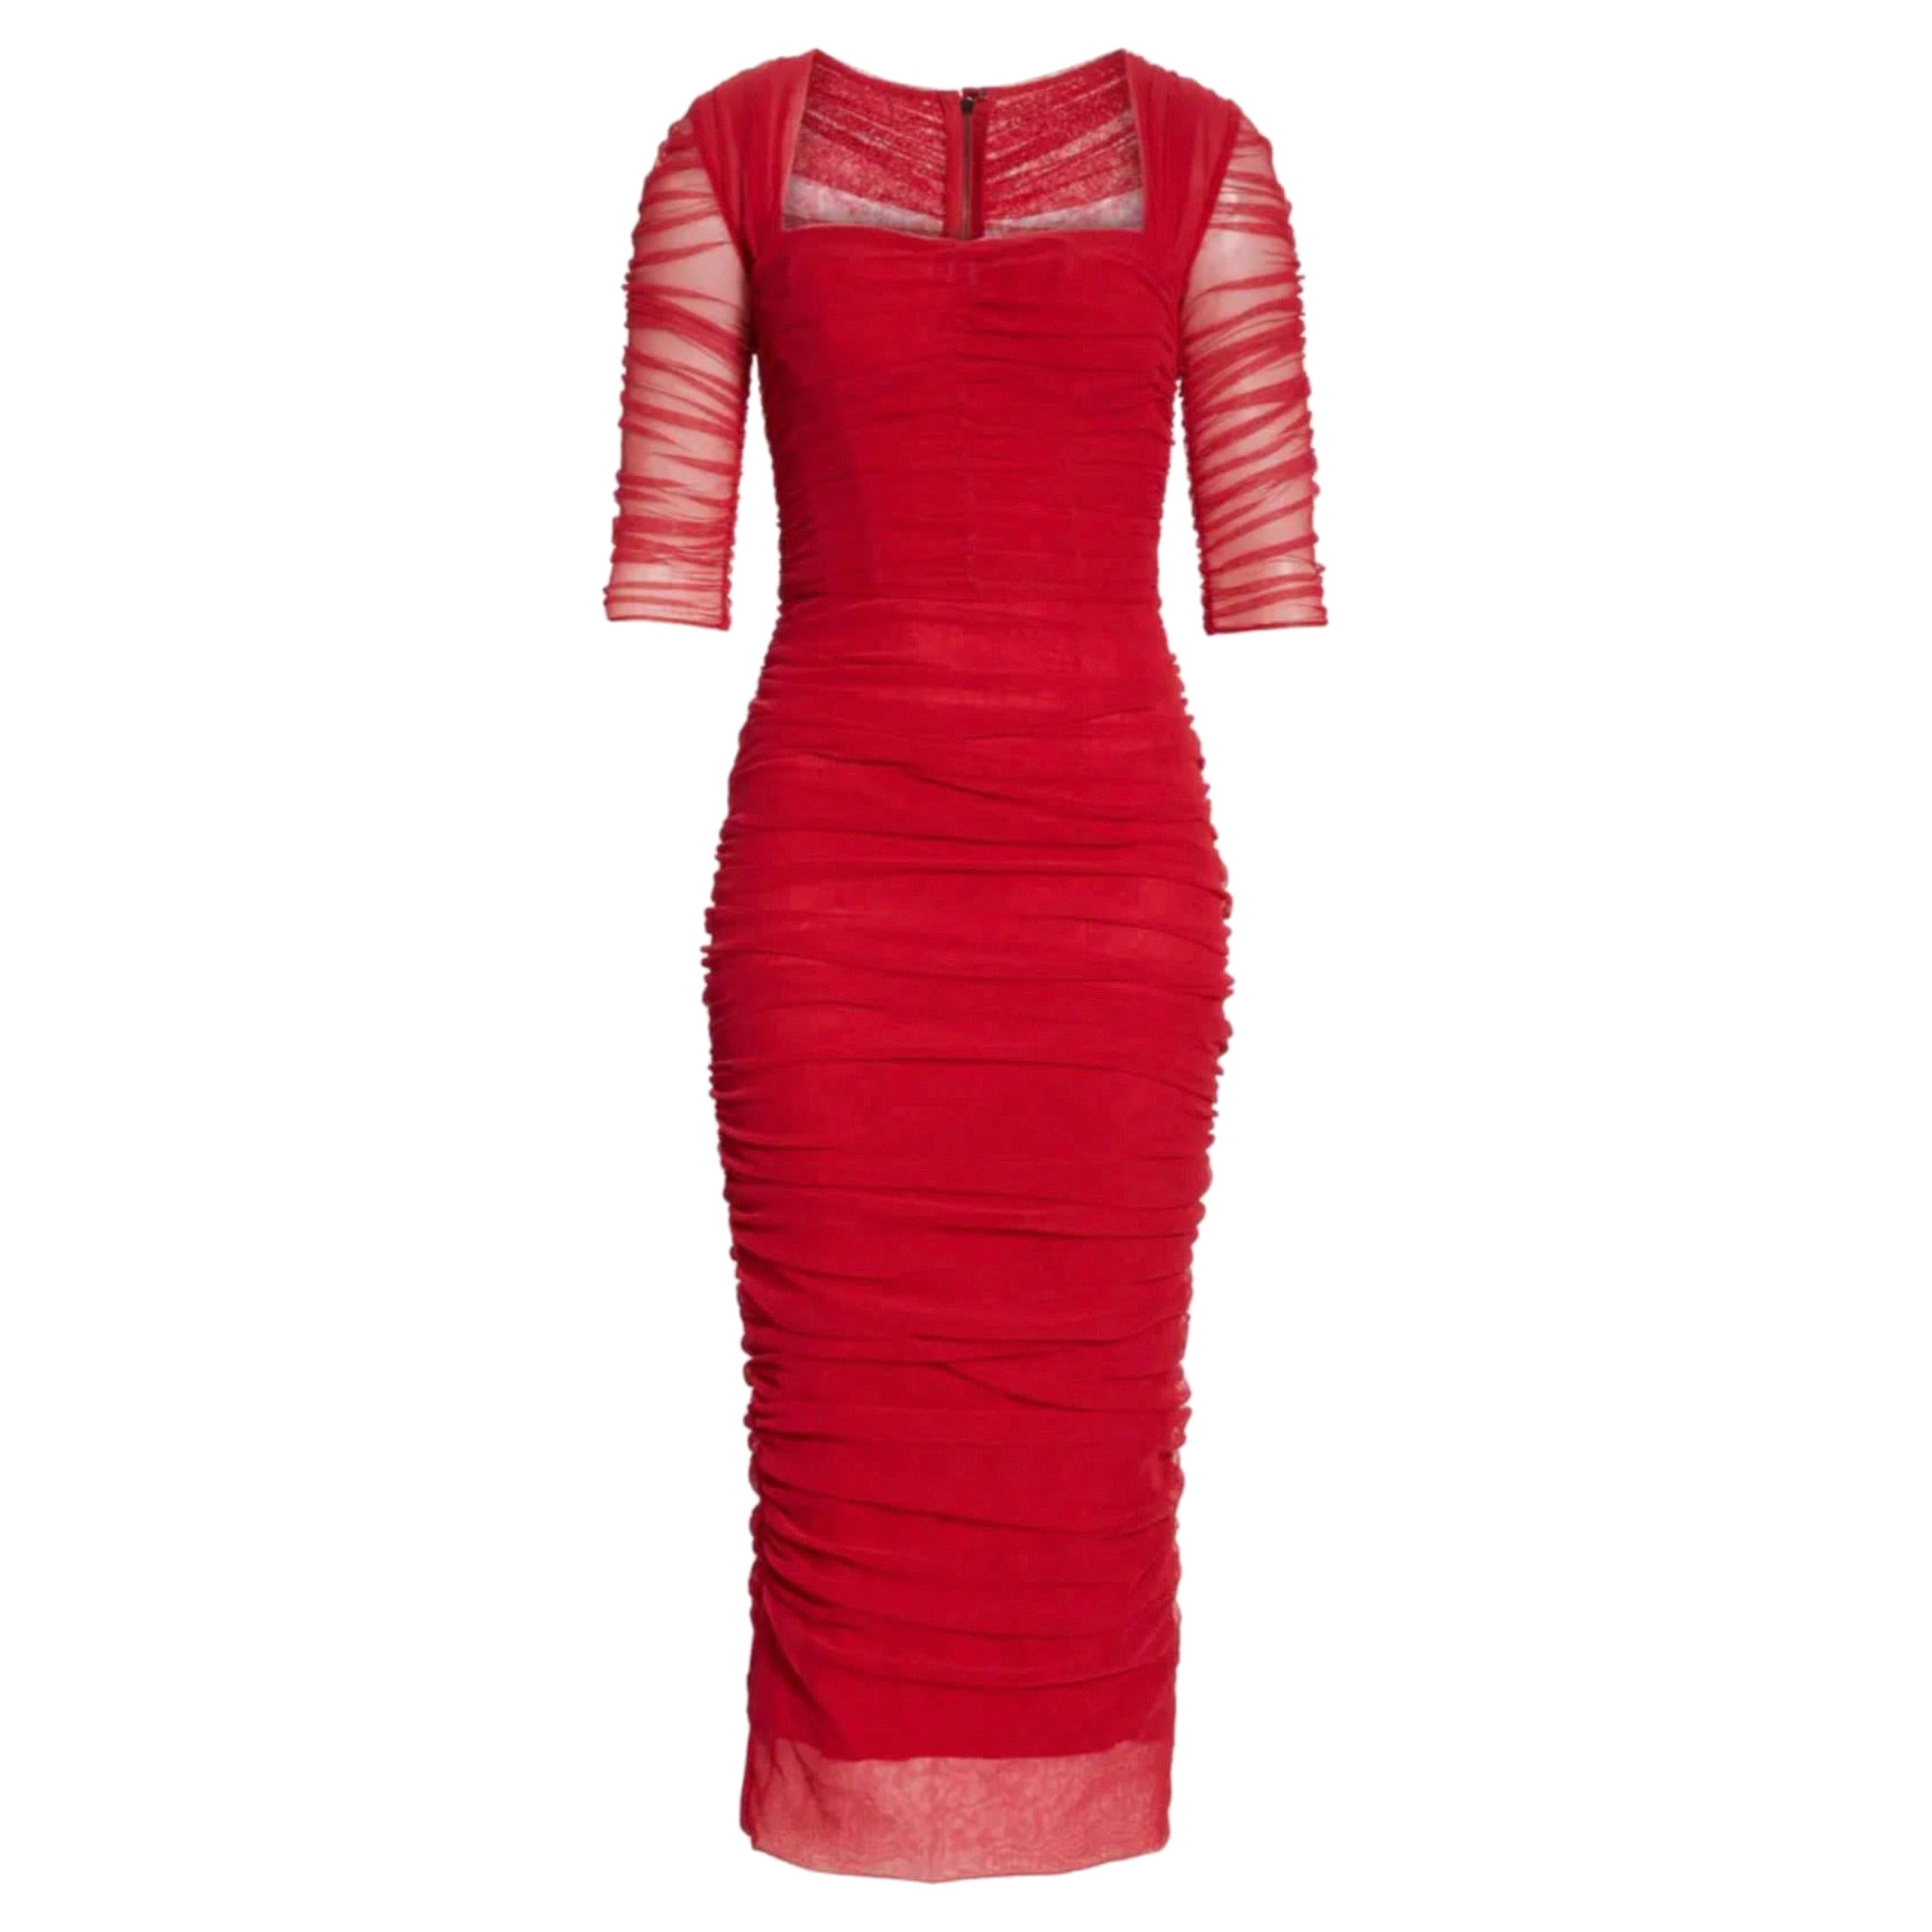 Dolce & Gabbana red two-layered cotton and nylon dress with gathers 